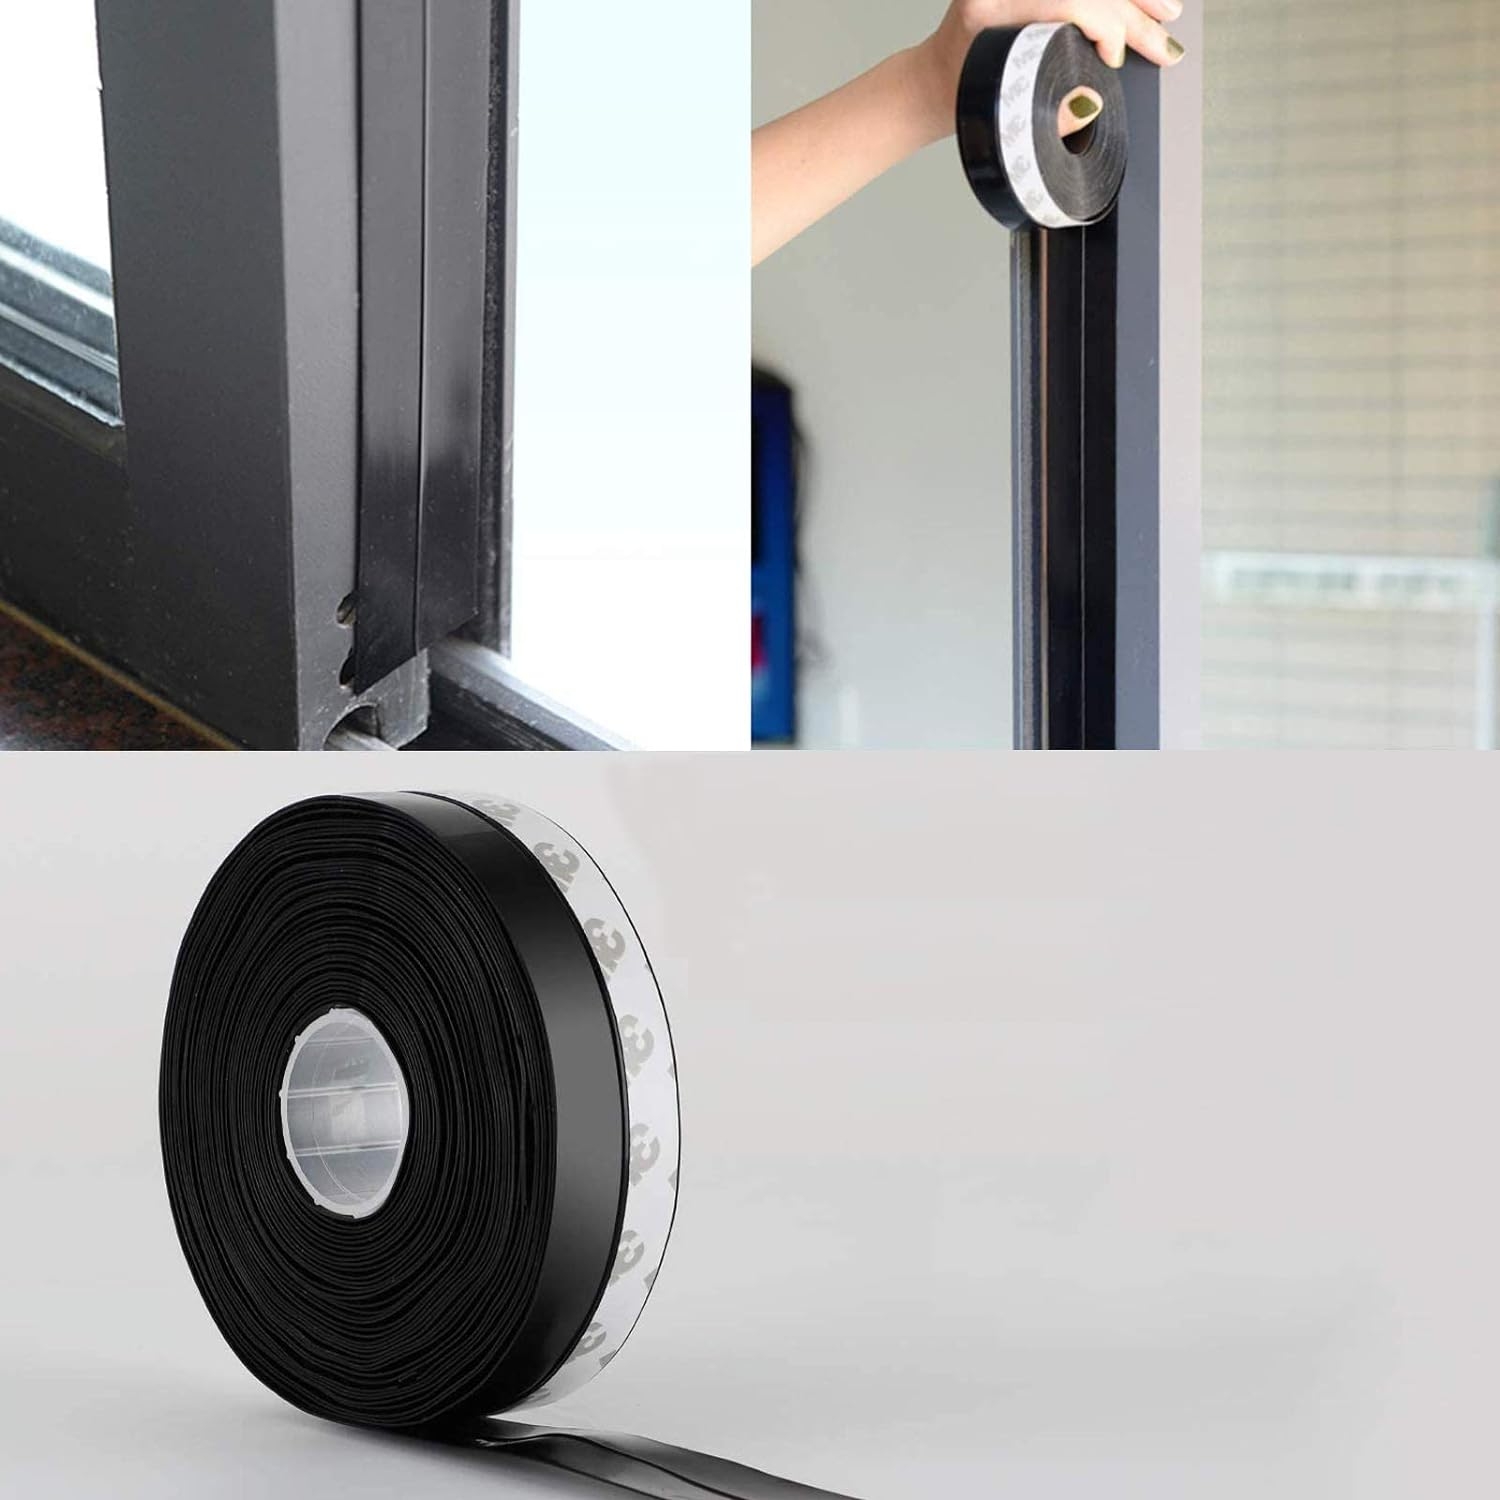 26 Feet Silicone Seal Strip, Door Weather Stripping Door Seal Strip Window Seal Silicone Sealing Tape for Door Draft Stopper Adhesive Tape for Doors Windows and Shower Glass Gaps (Black, 45MM)